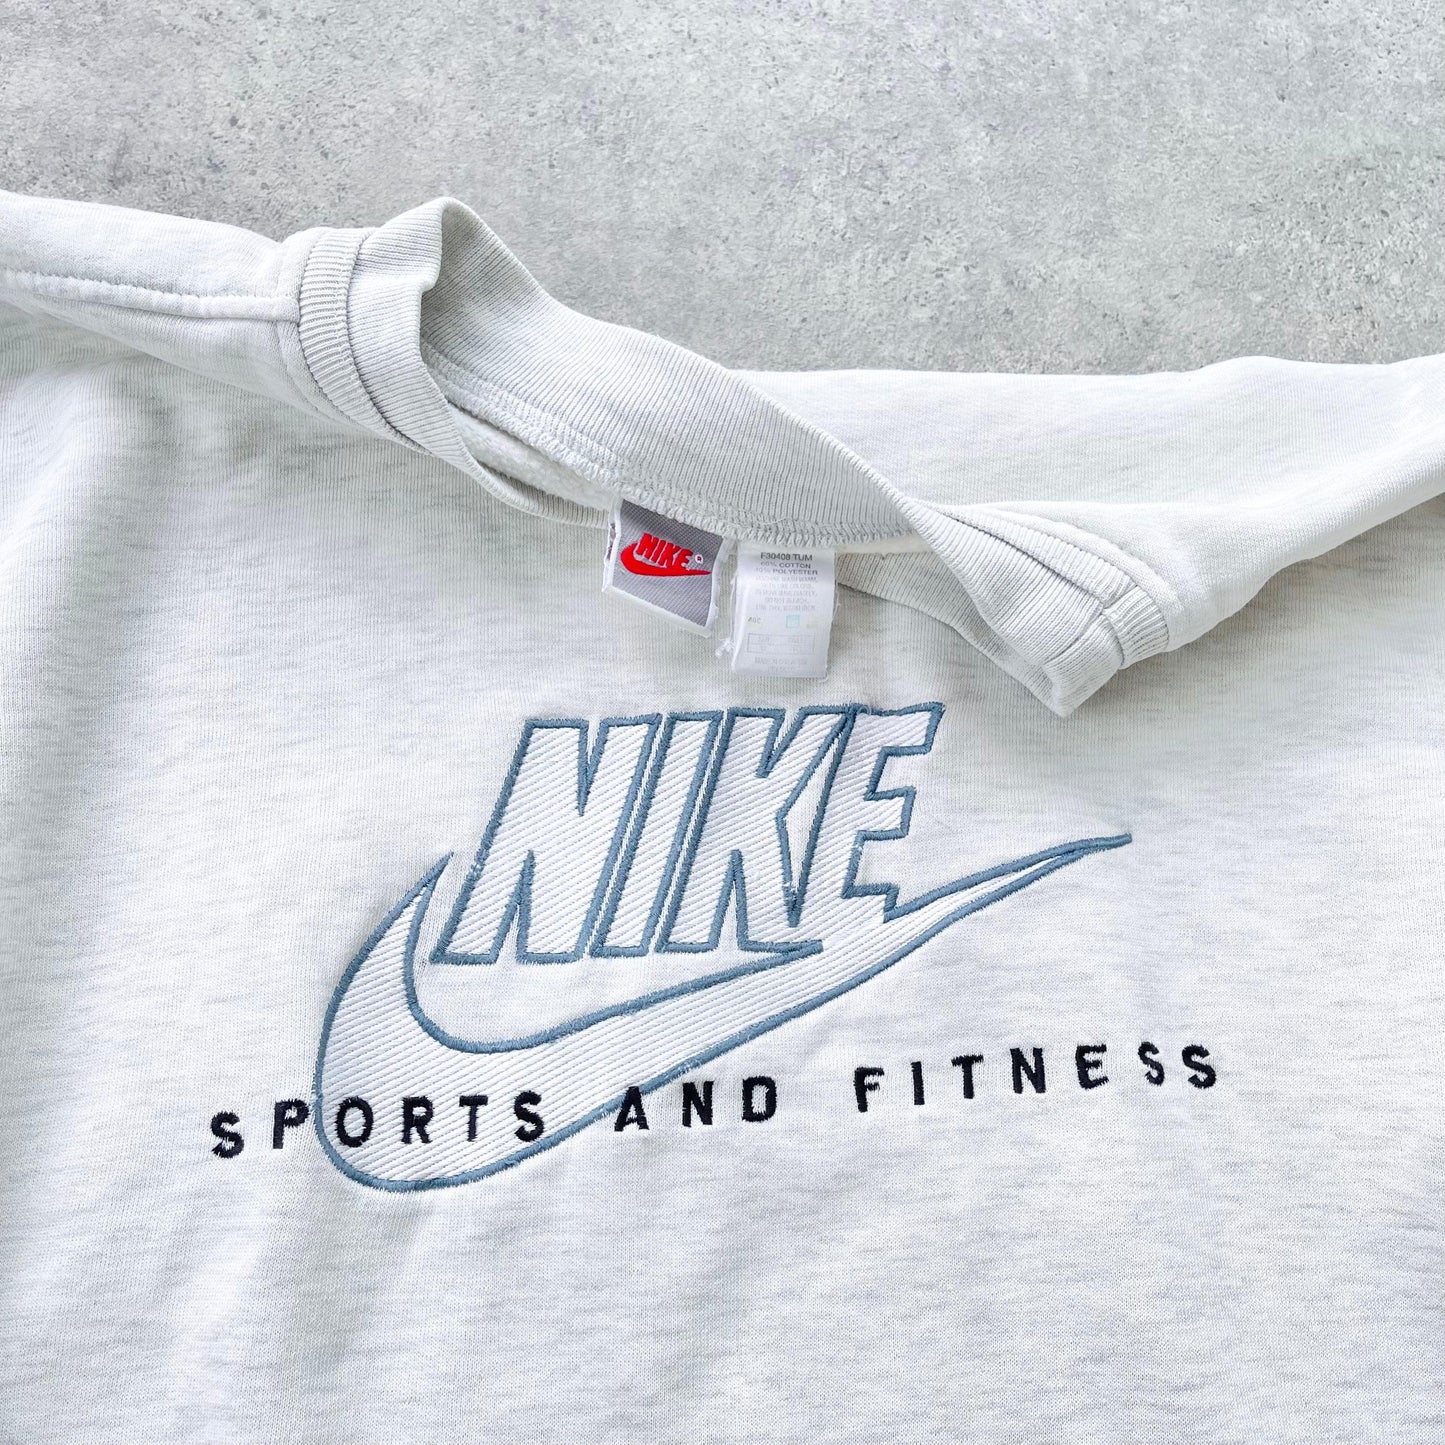 Nike RARE 1990s ‘sports and fitness’ heavyweight embroidered sweatshirt (XL) - Known Source